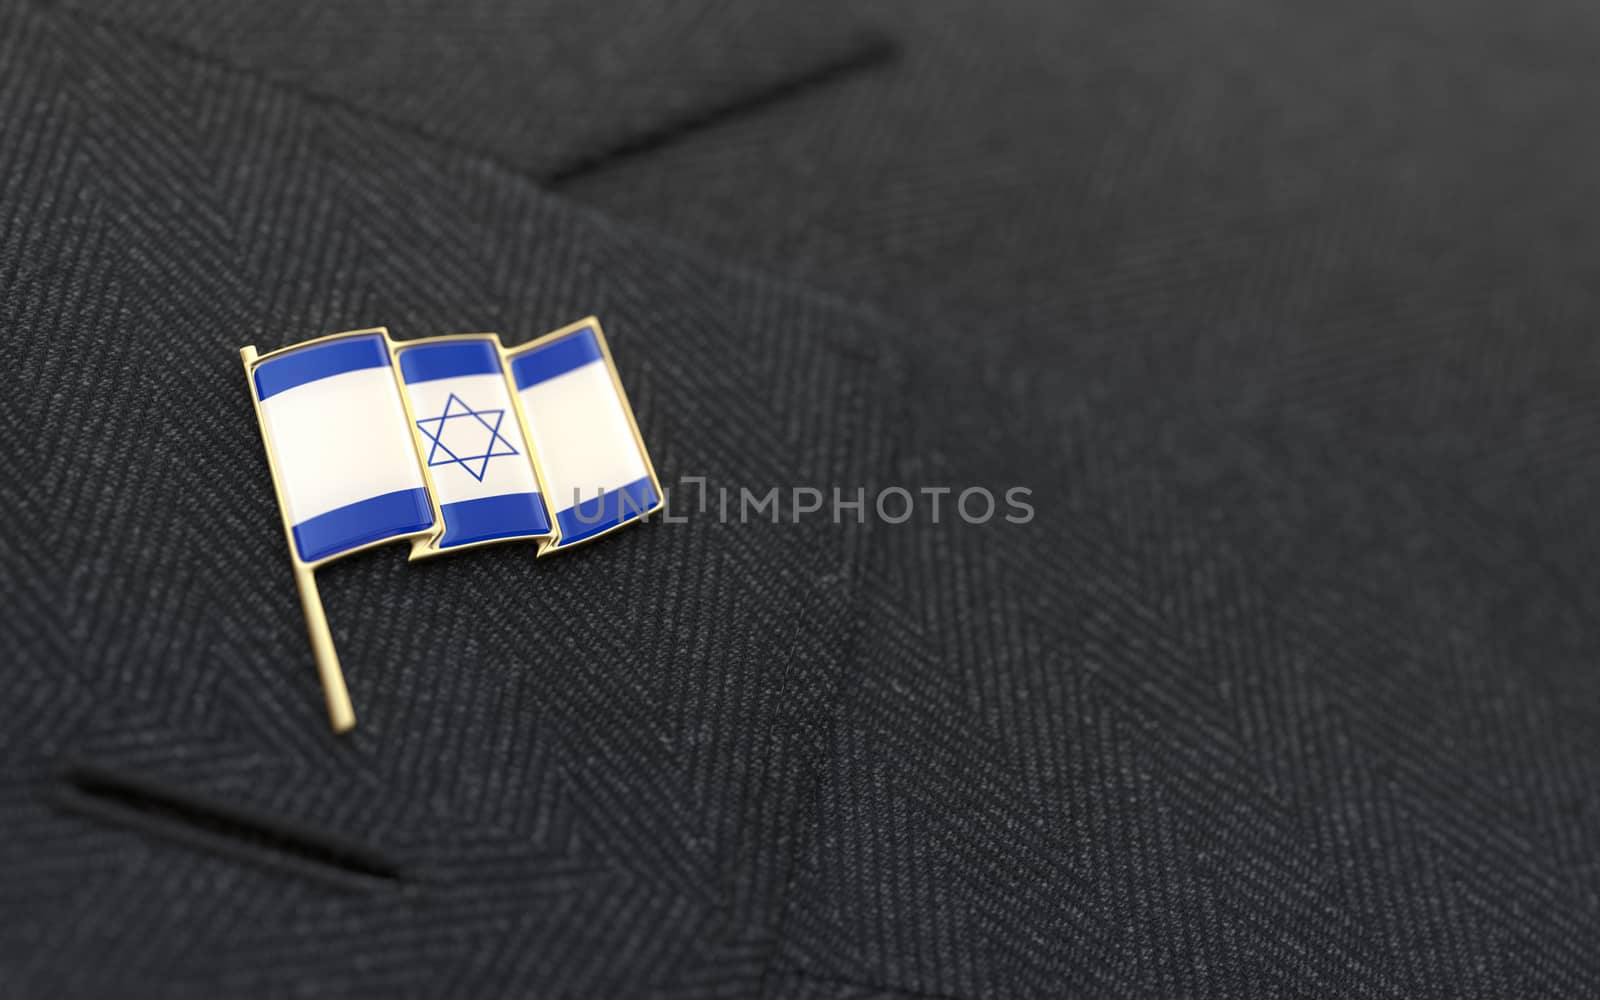 Israel flag lapel pin on the collar of a business suit jacket shows patriotism